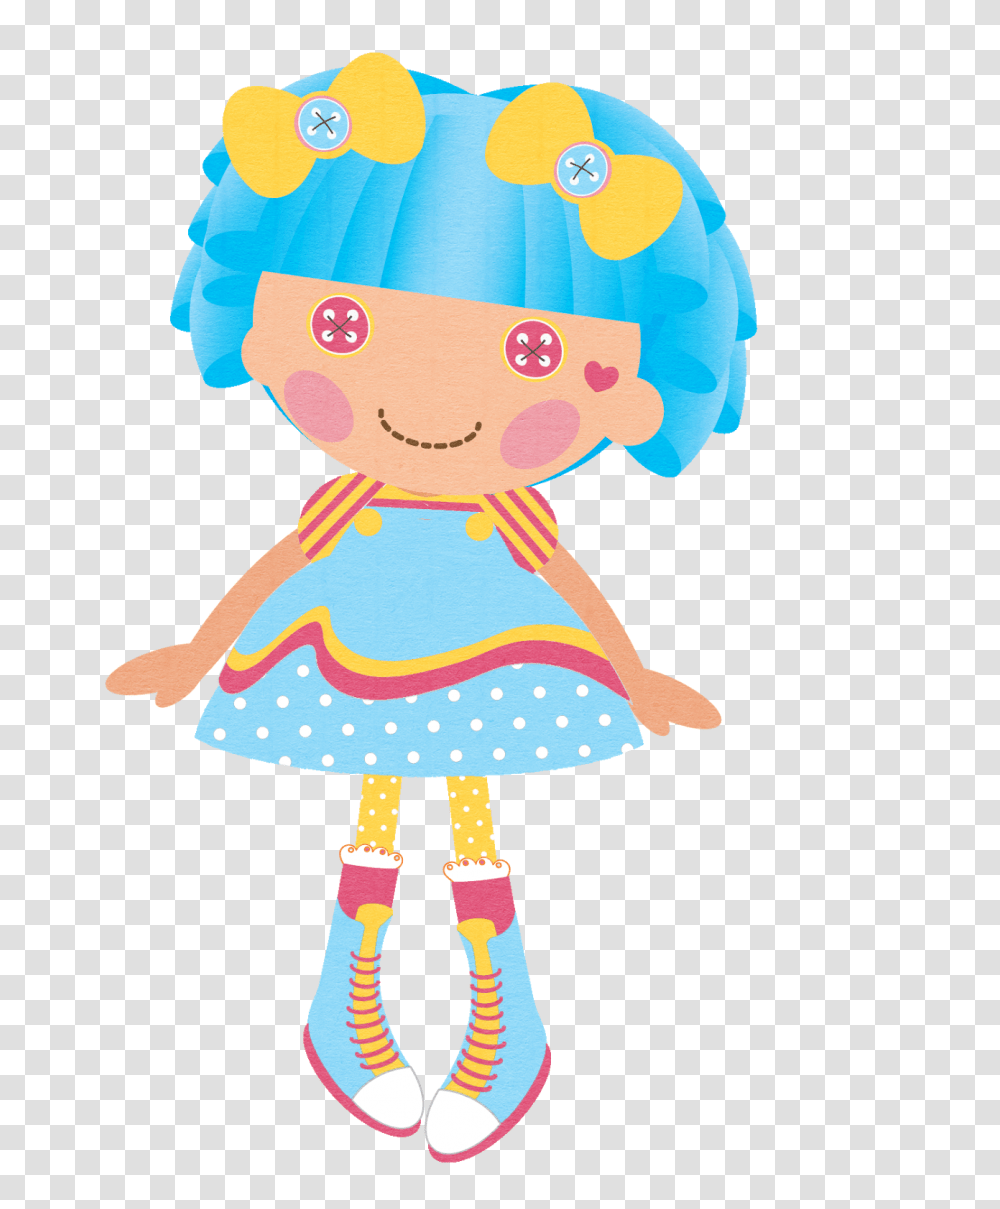 Passatempo Da Ana Imagens Lalaloopsy Lalaloppsy Printables, Doll, Toy, Rattle Transparent Png